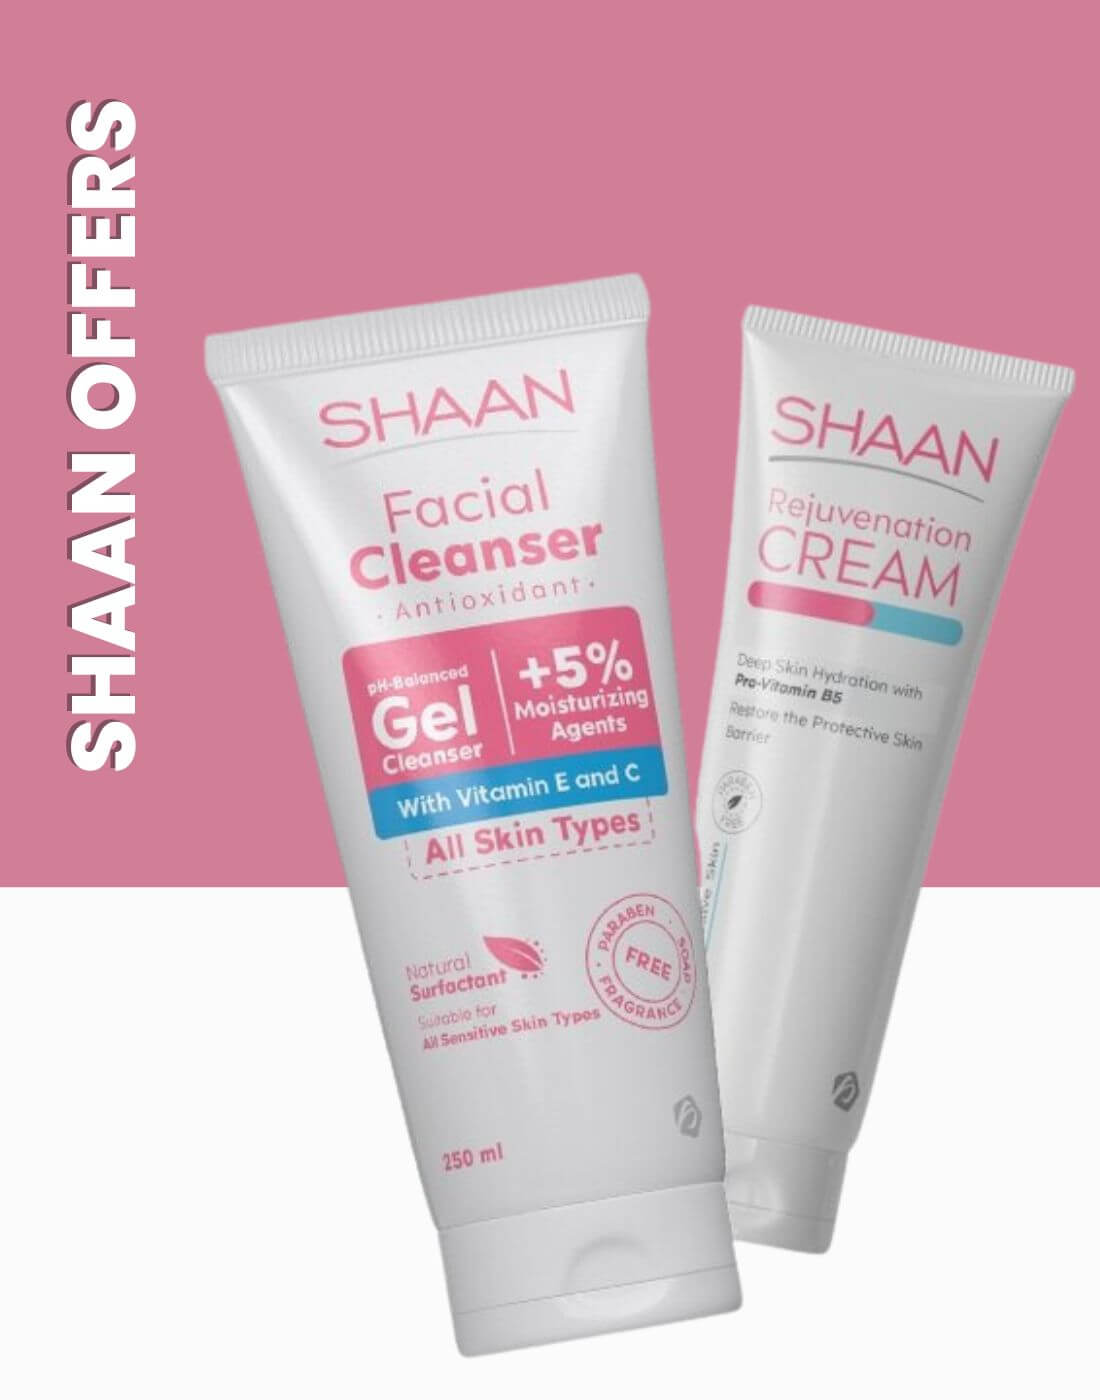 shaan offers